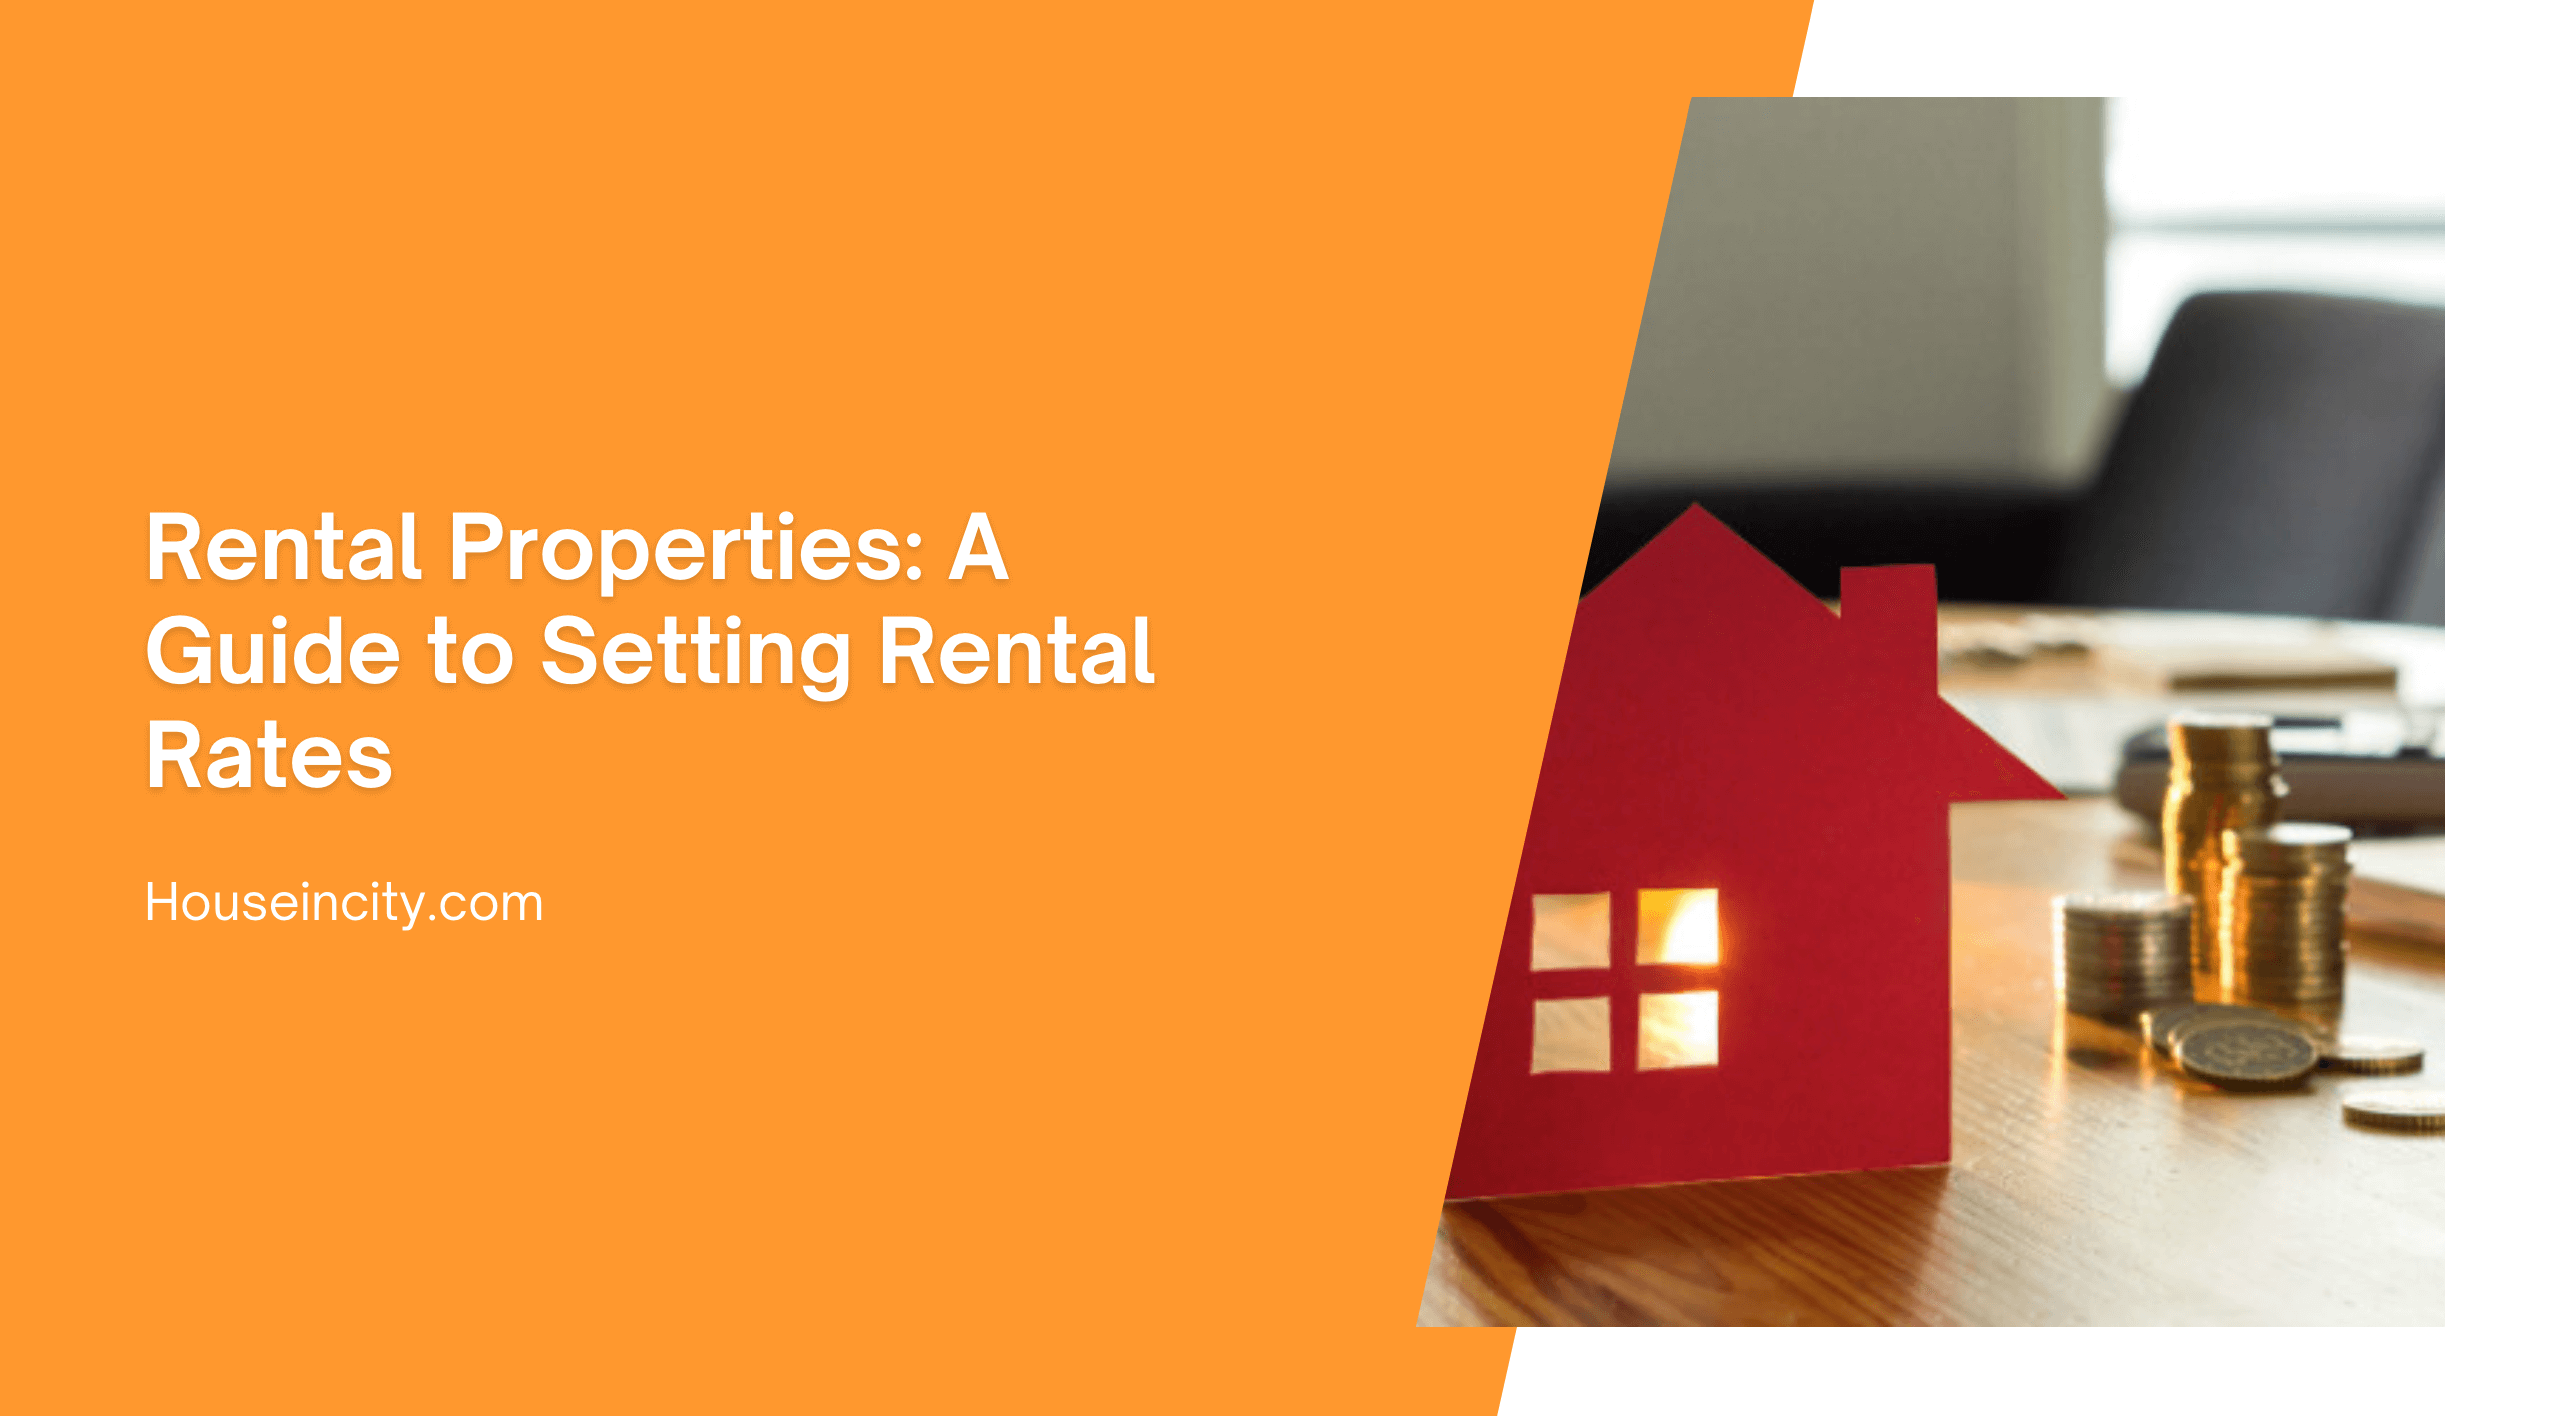 Rental Properties: A Guide to Setting Rental Rates